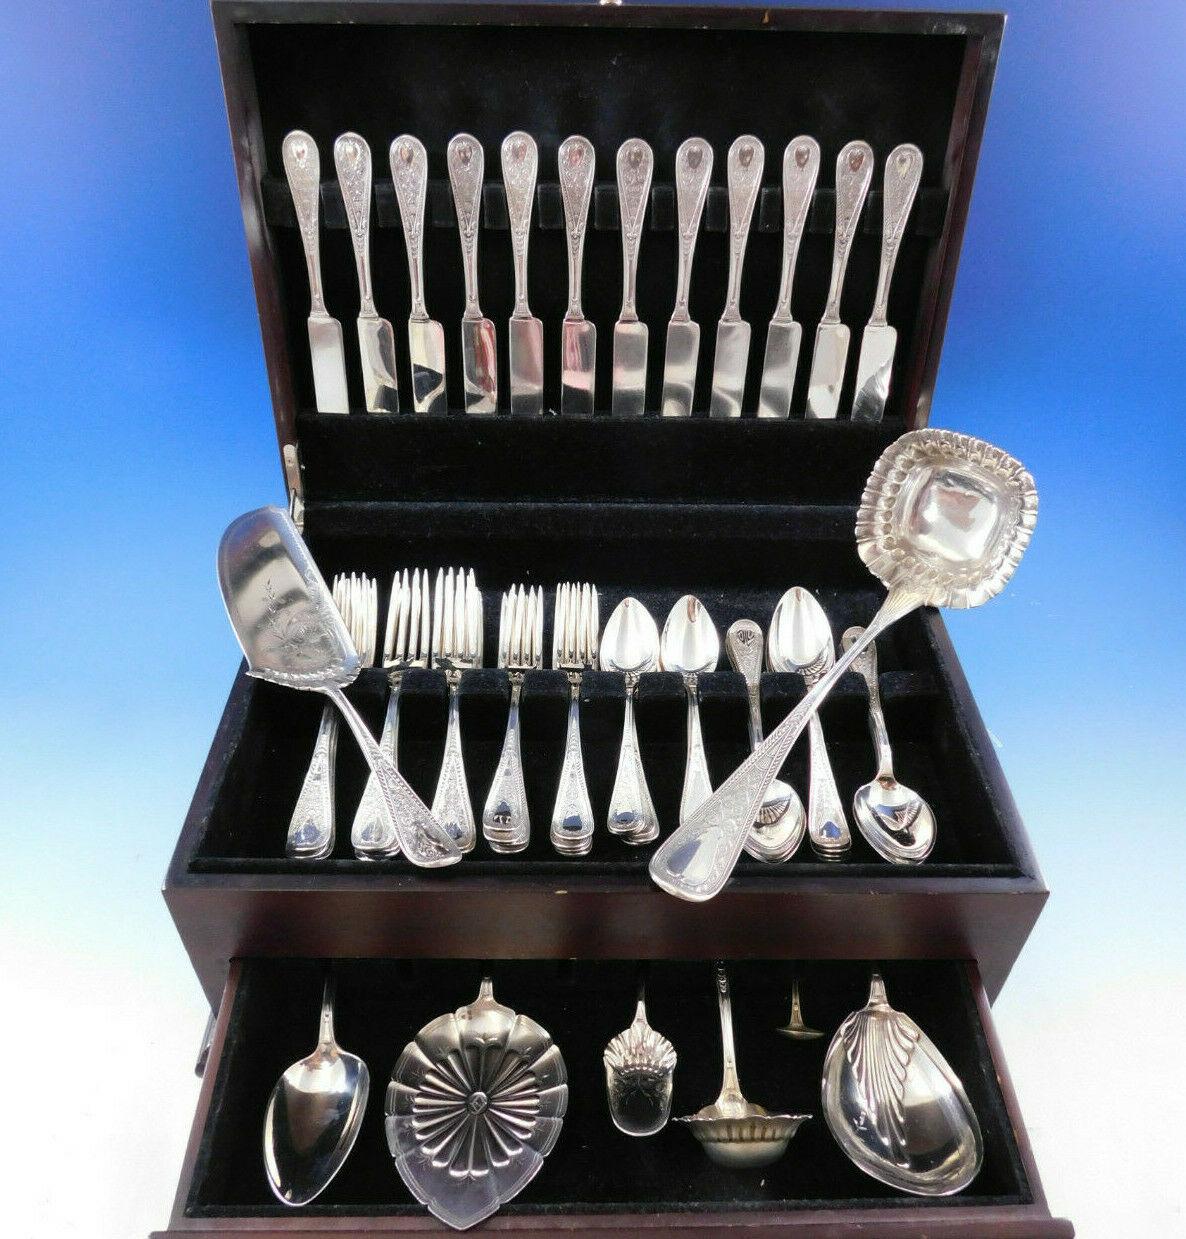 Rare Hindostanee by Gorham sterling silver flatware set - 66 pieces. This set includes:

12 knives, flat handle all-sterling, 8 1/4